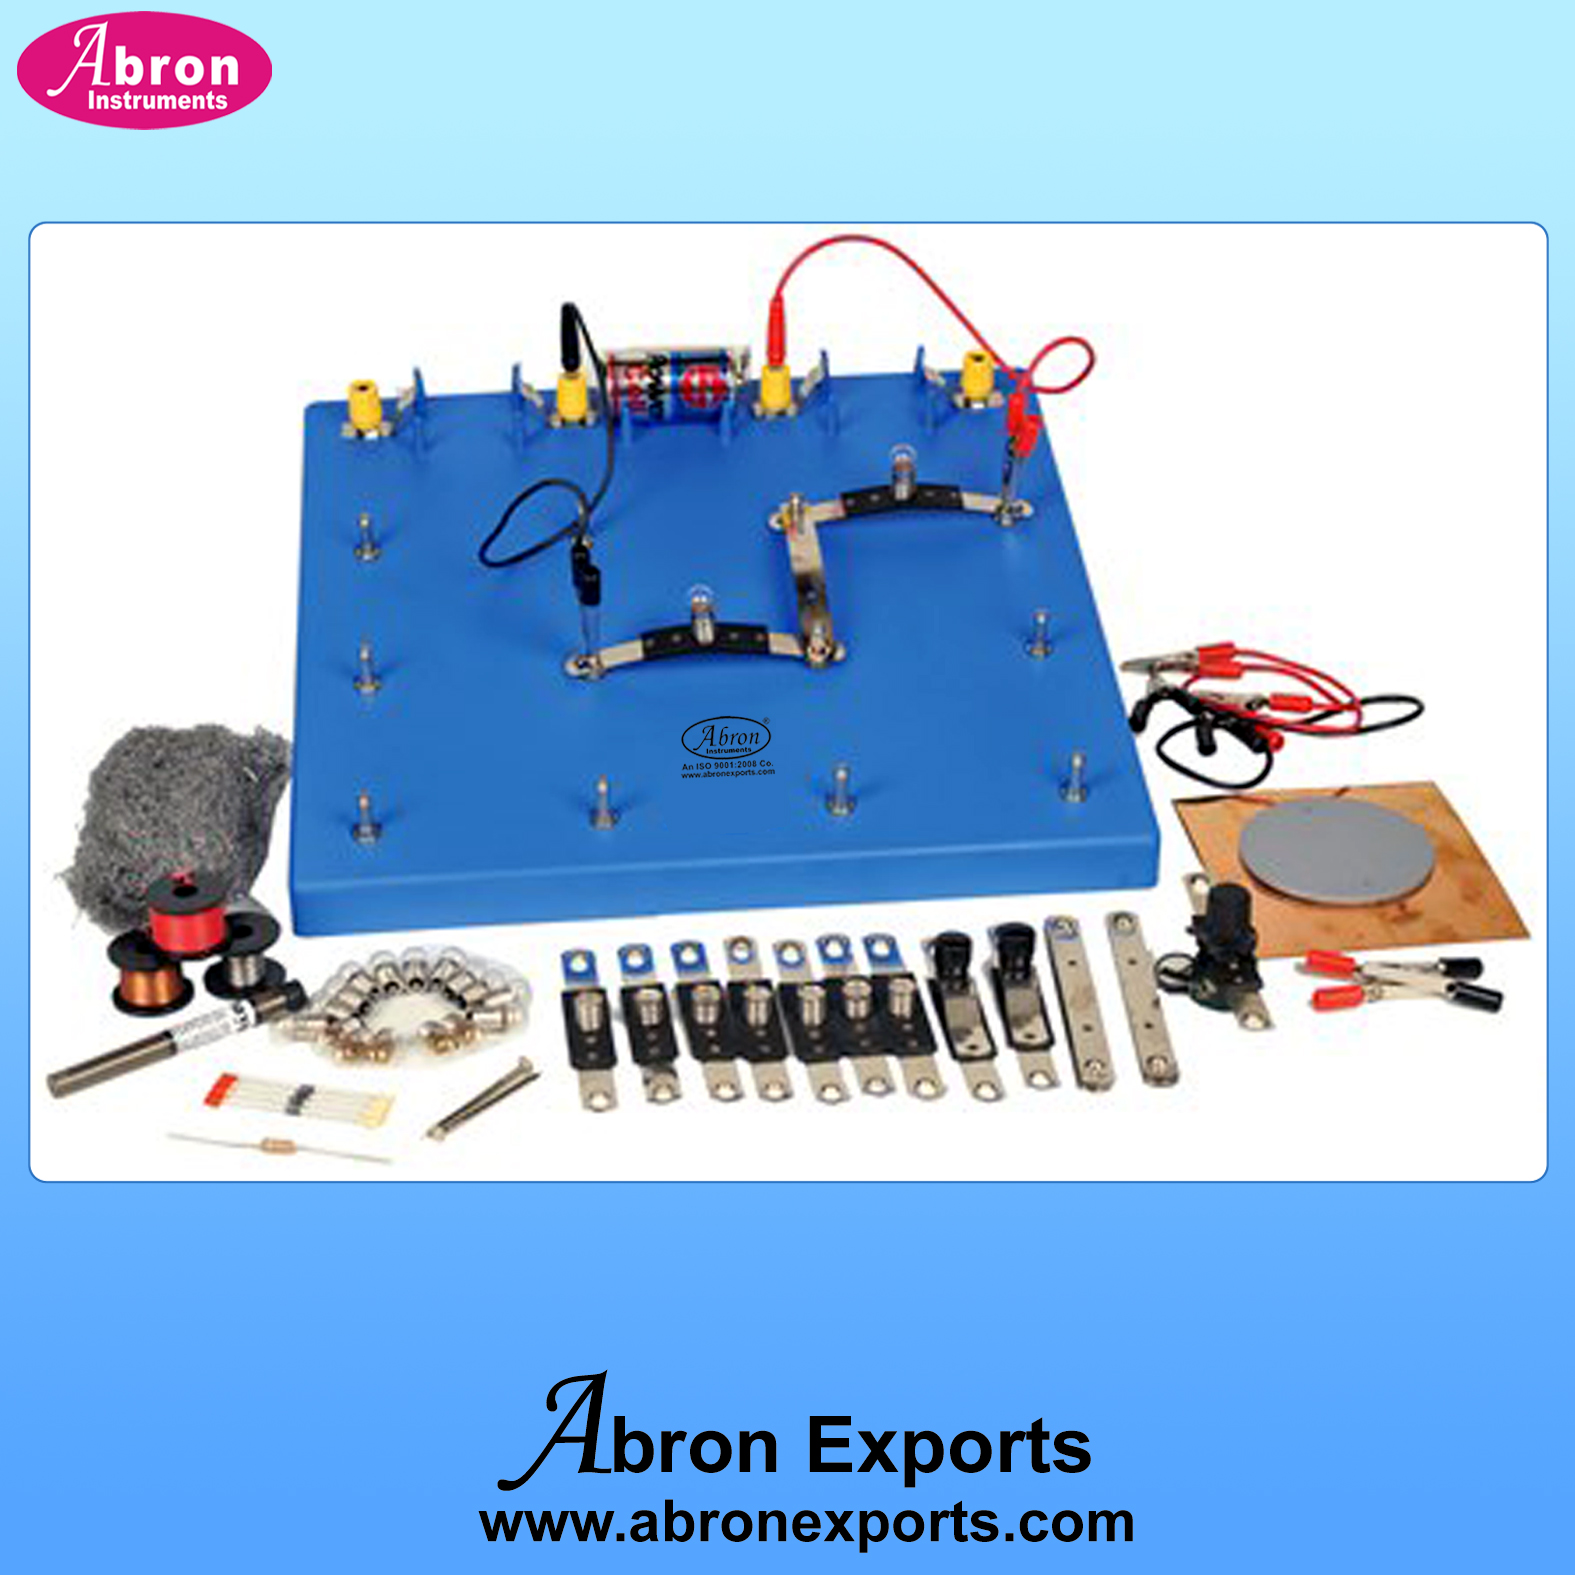 Electronic kit westminster worcester circuit component abron spare loose worcircuit baord AE-1224W1